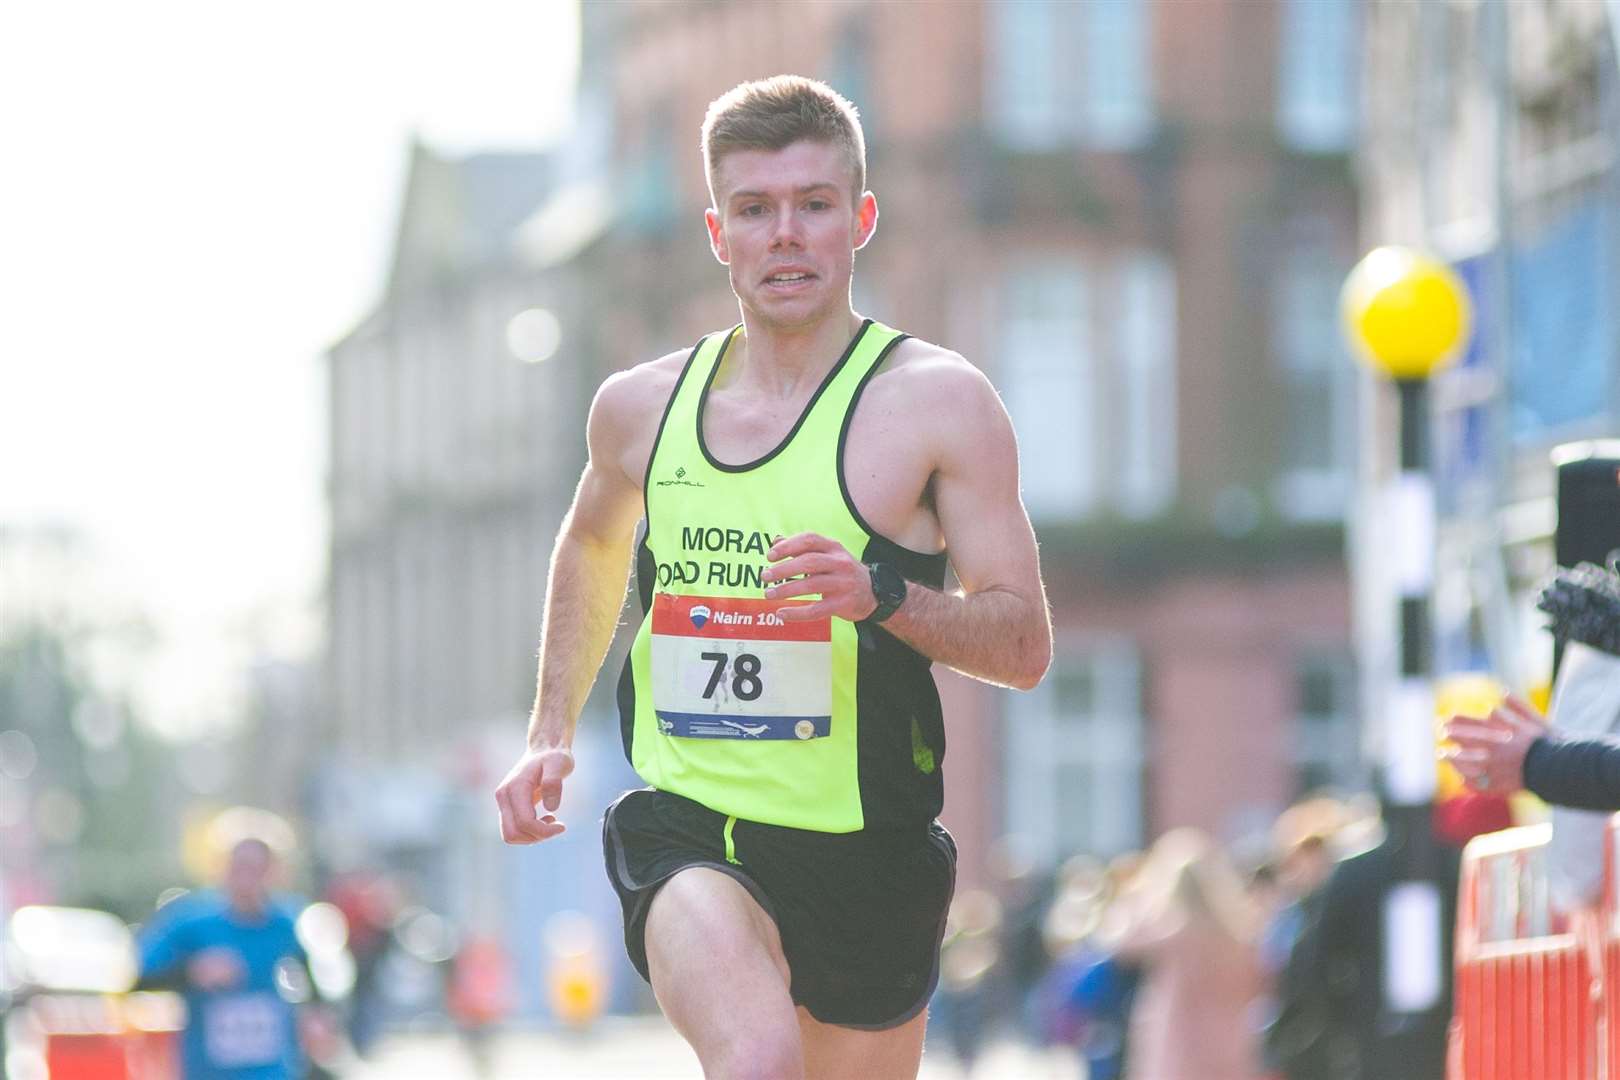 Moray Road Runners' Ewan Davidson was third in the Baxters 10k.